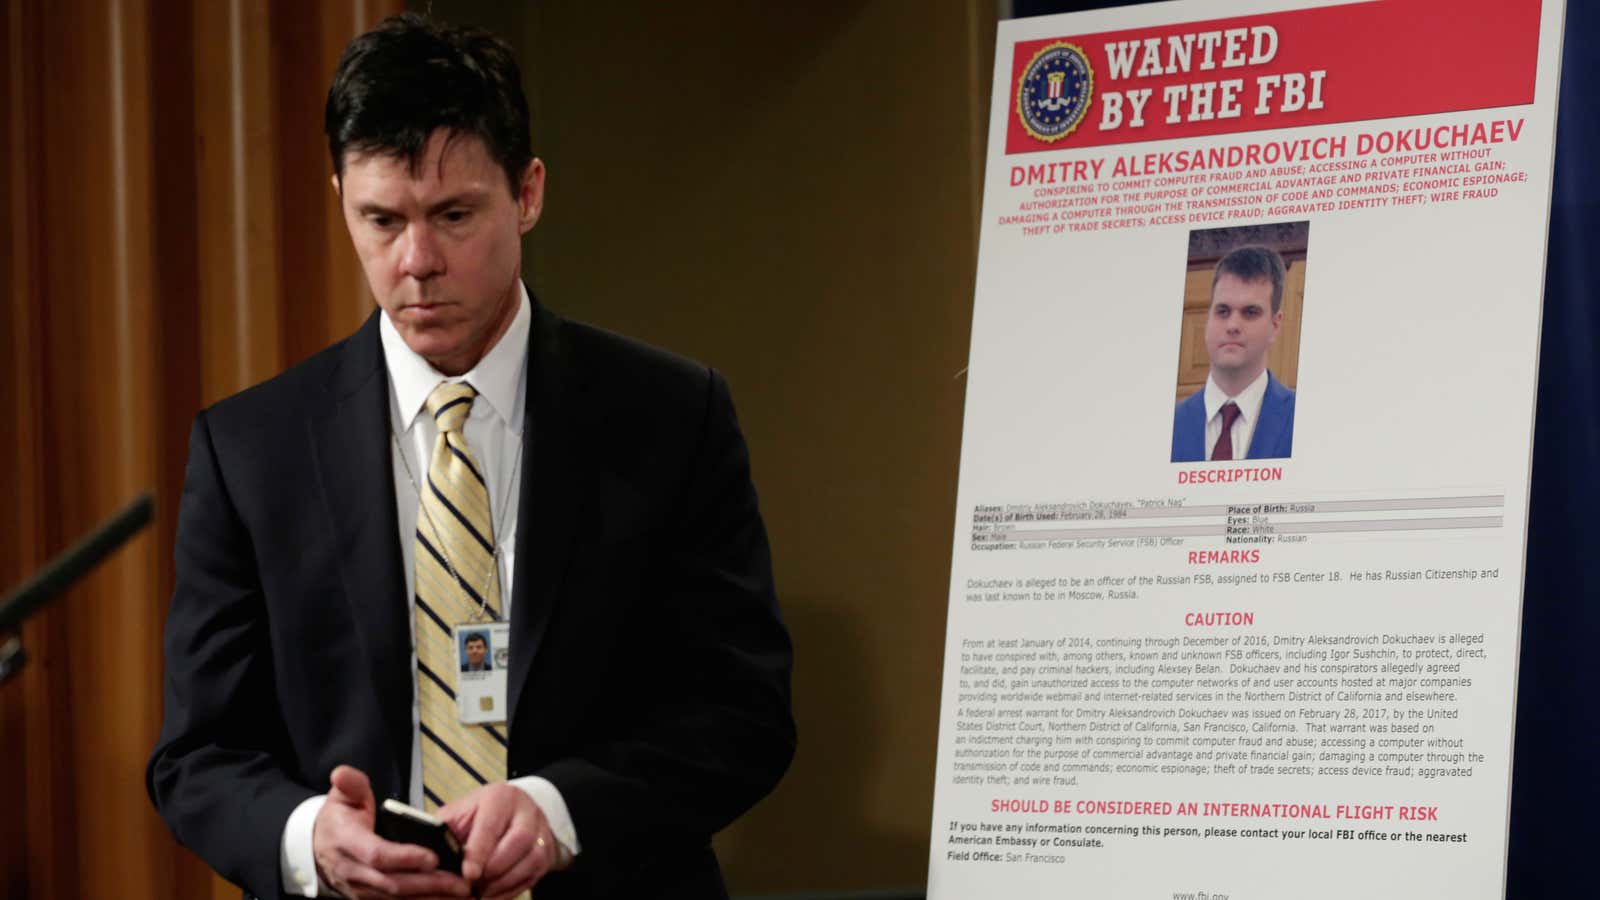 A Department of Justice staffer walks past a poster of a suspected Russian hacker.